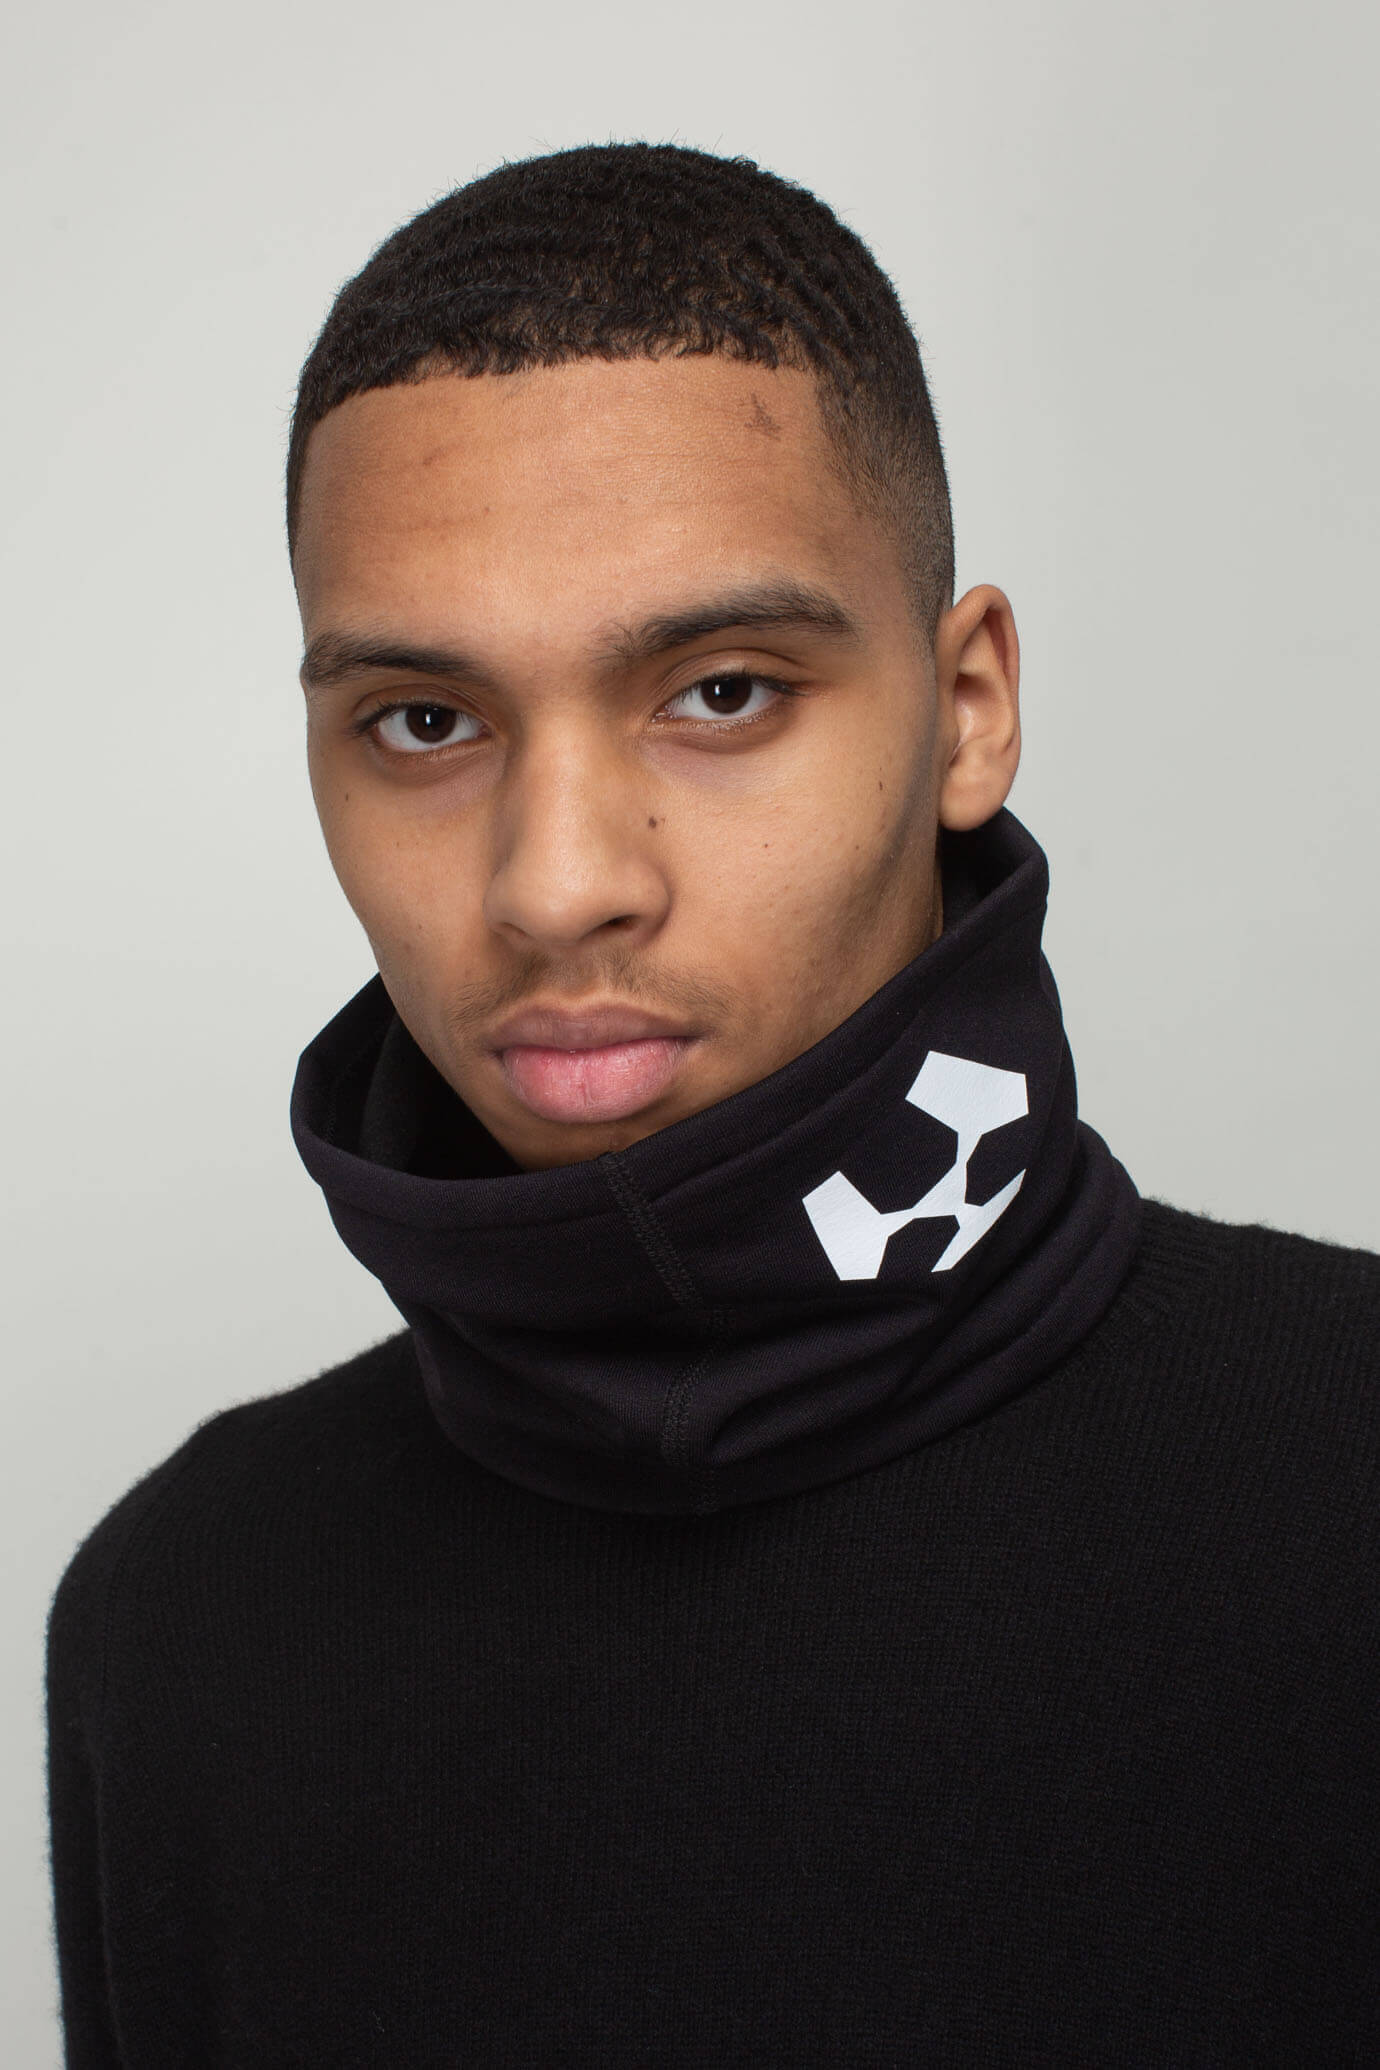 NG1-PS Men's Neckgaiter of synthetic fibers